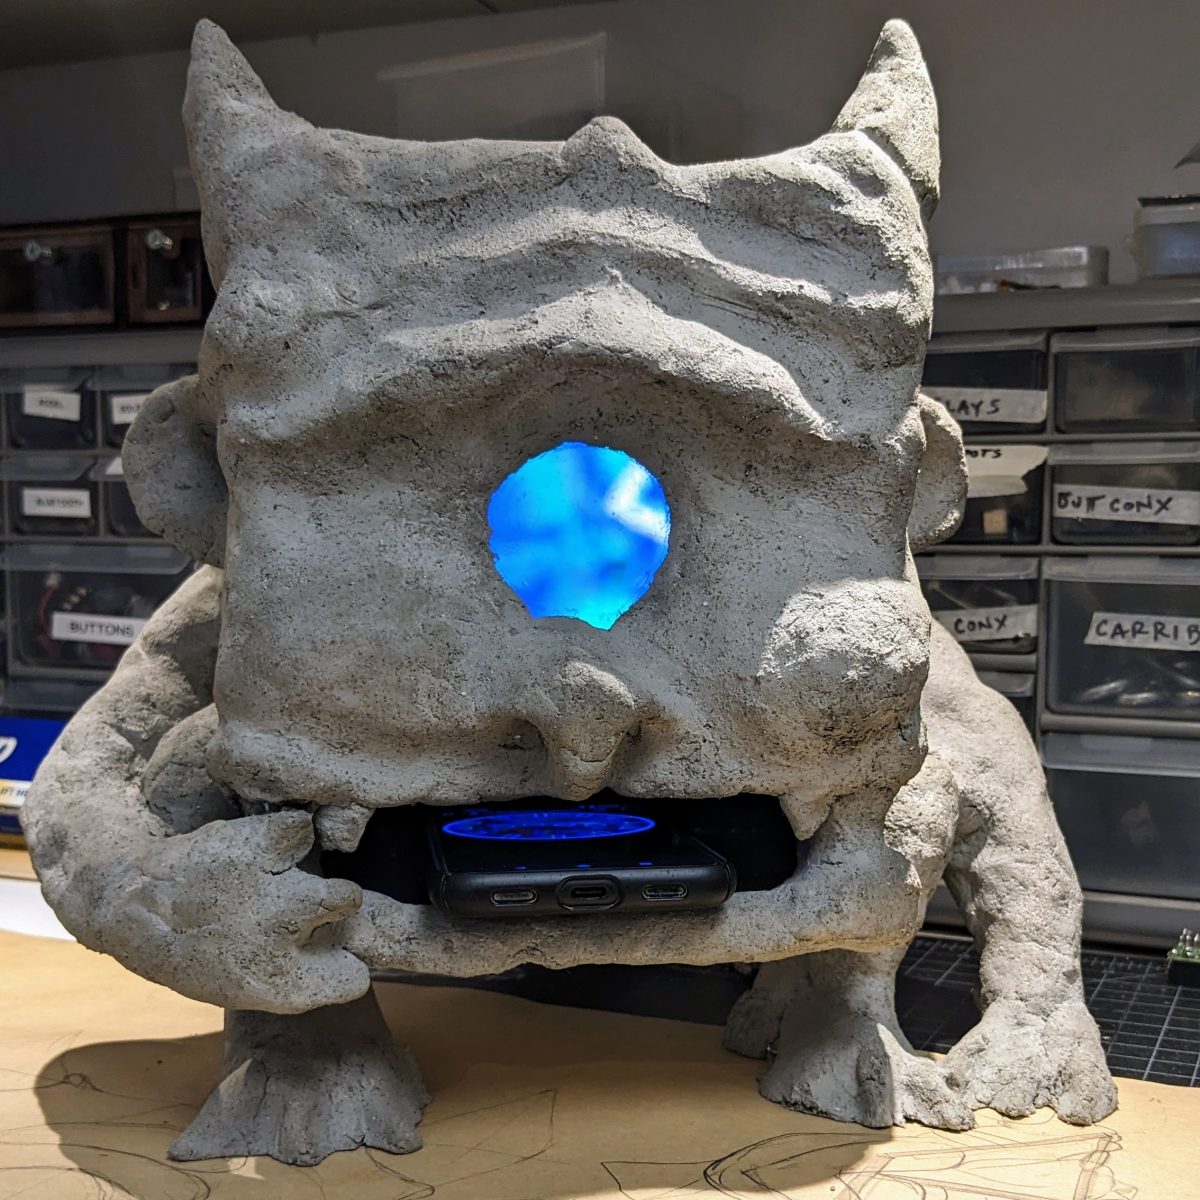 A gargoyle sculpture with a phone on its mouth,